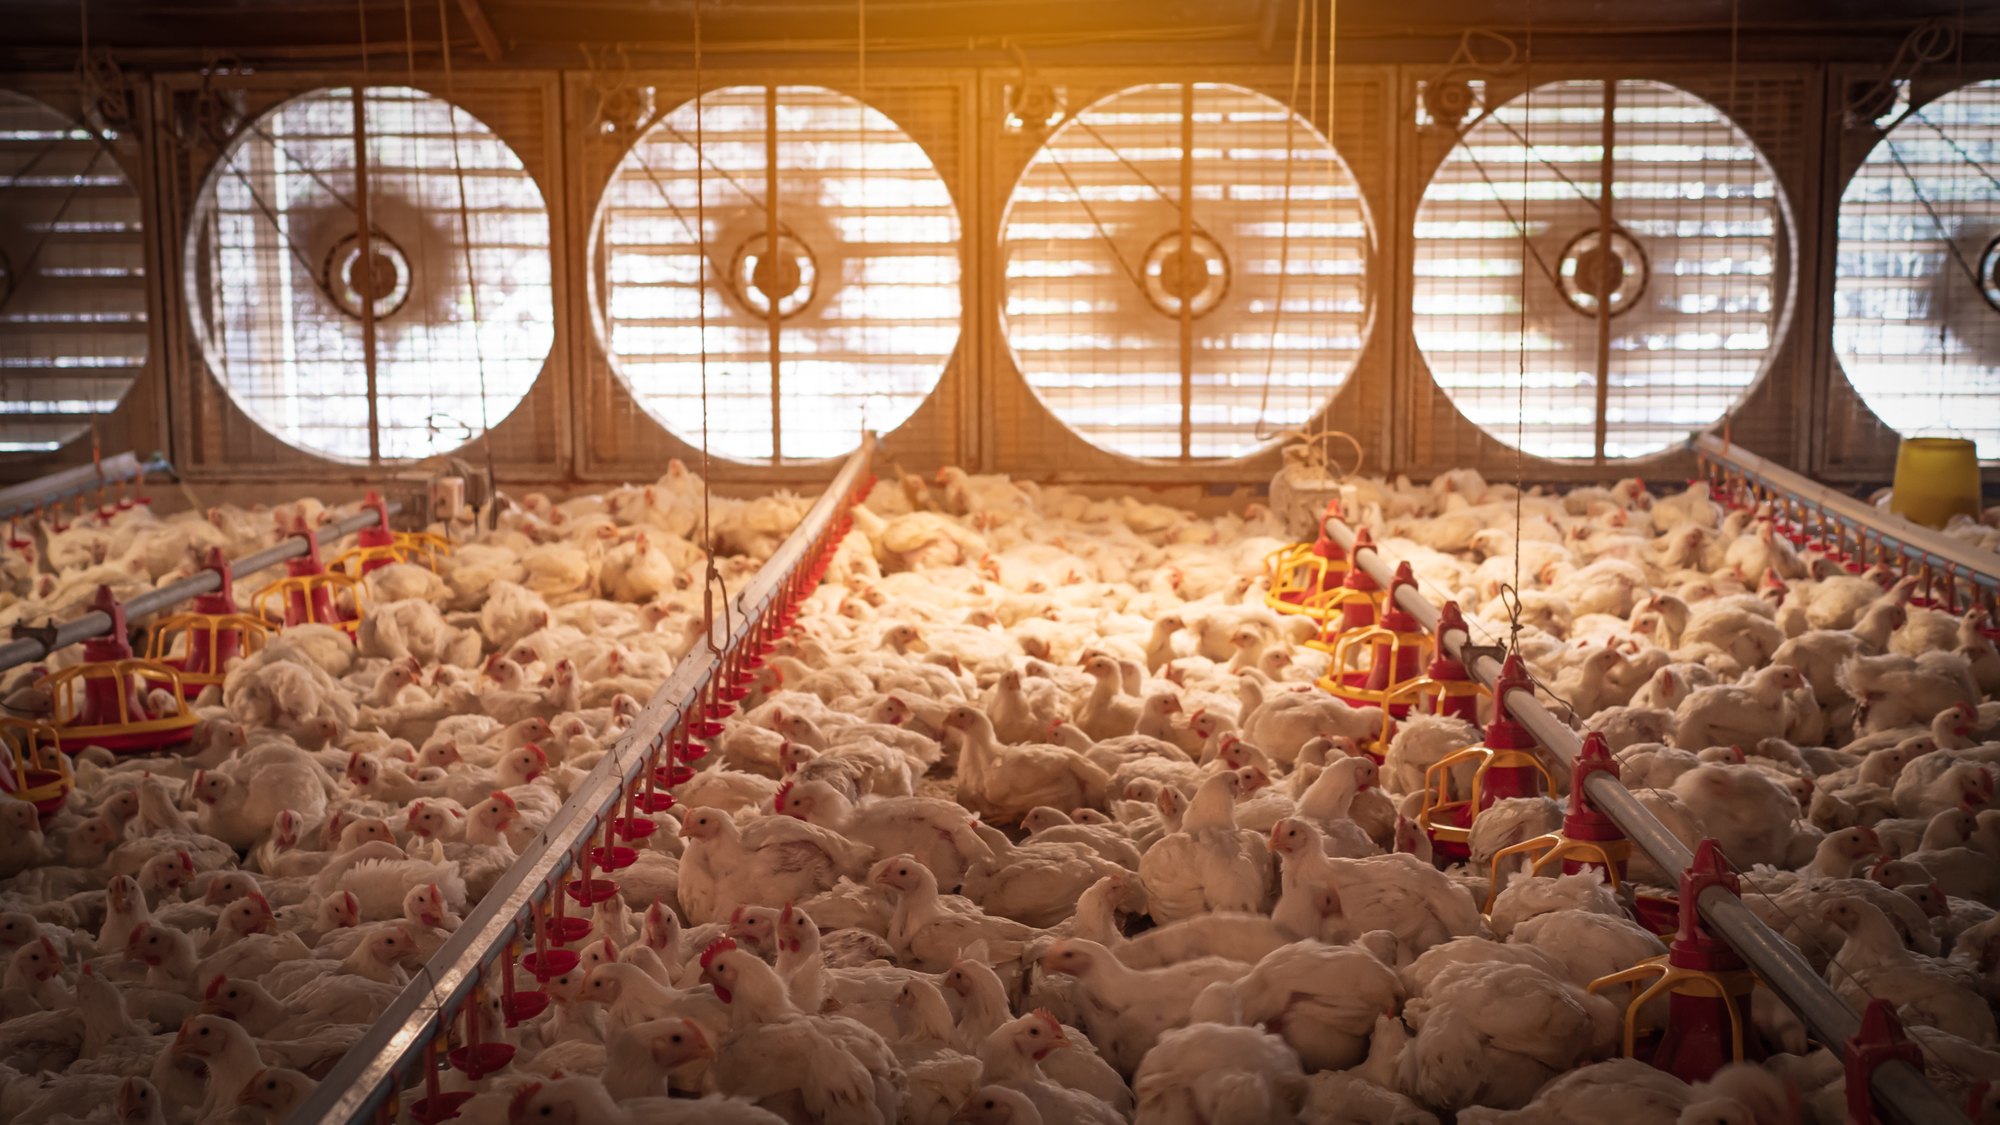 White chickens in smart farming business by auto feeding and air flow with yellow light 110221.